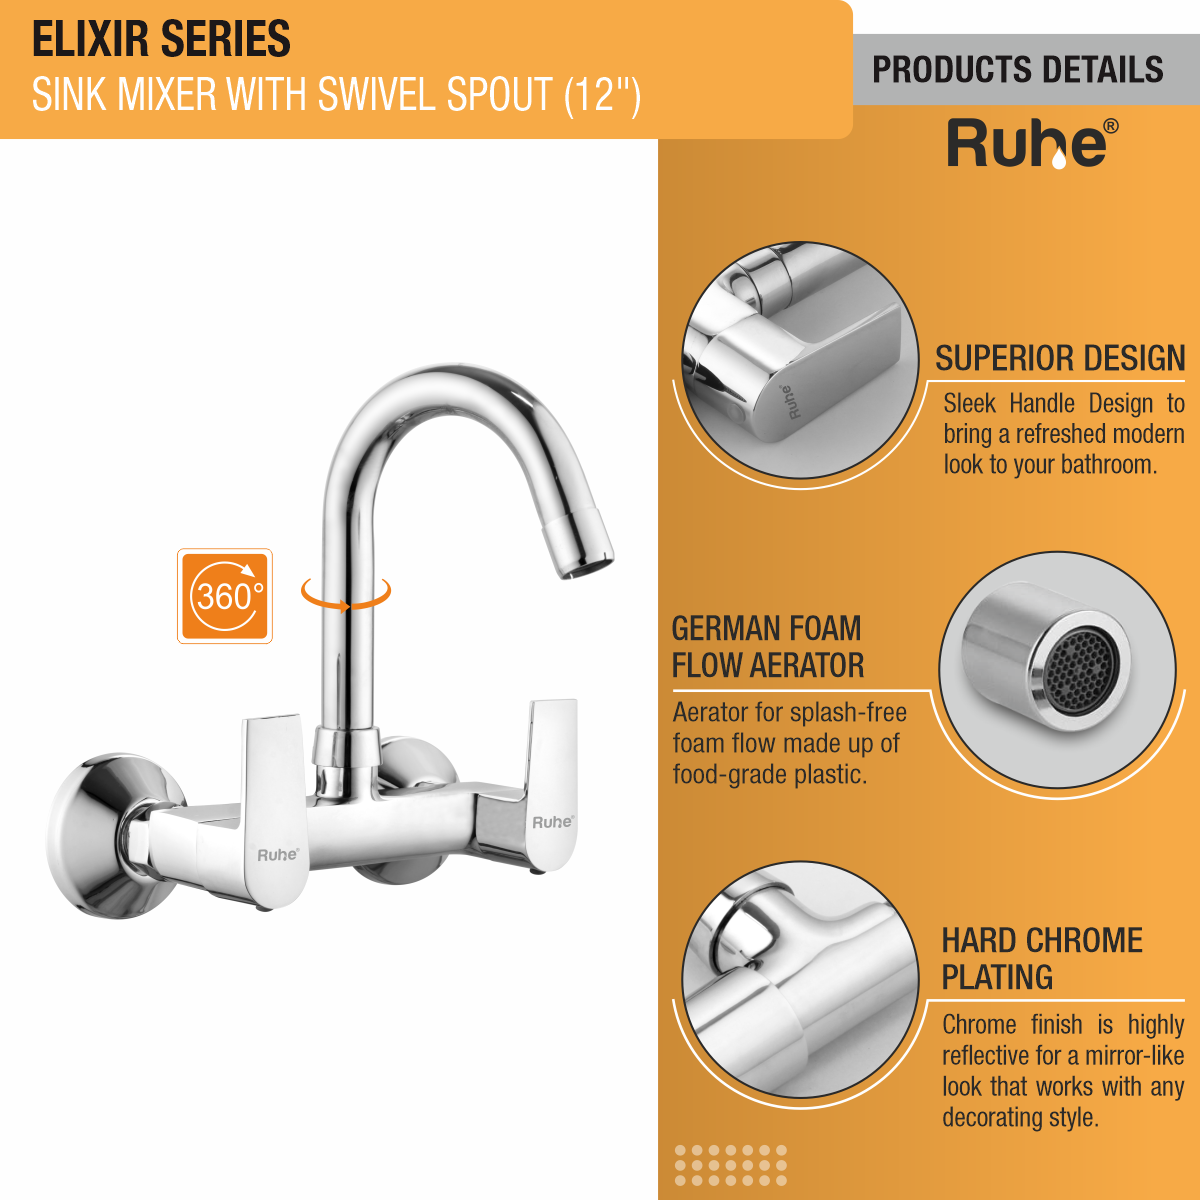 Elixir Sink Mixer with Small (12 inches) Round Swivel Spout Faucet products details